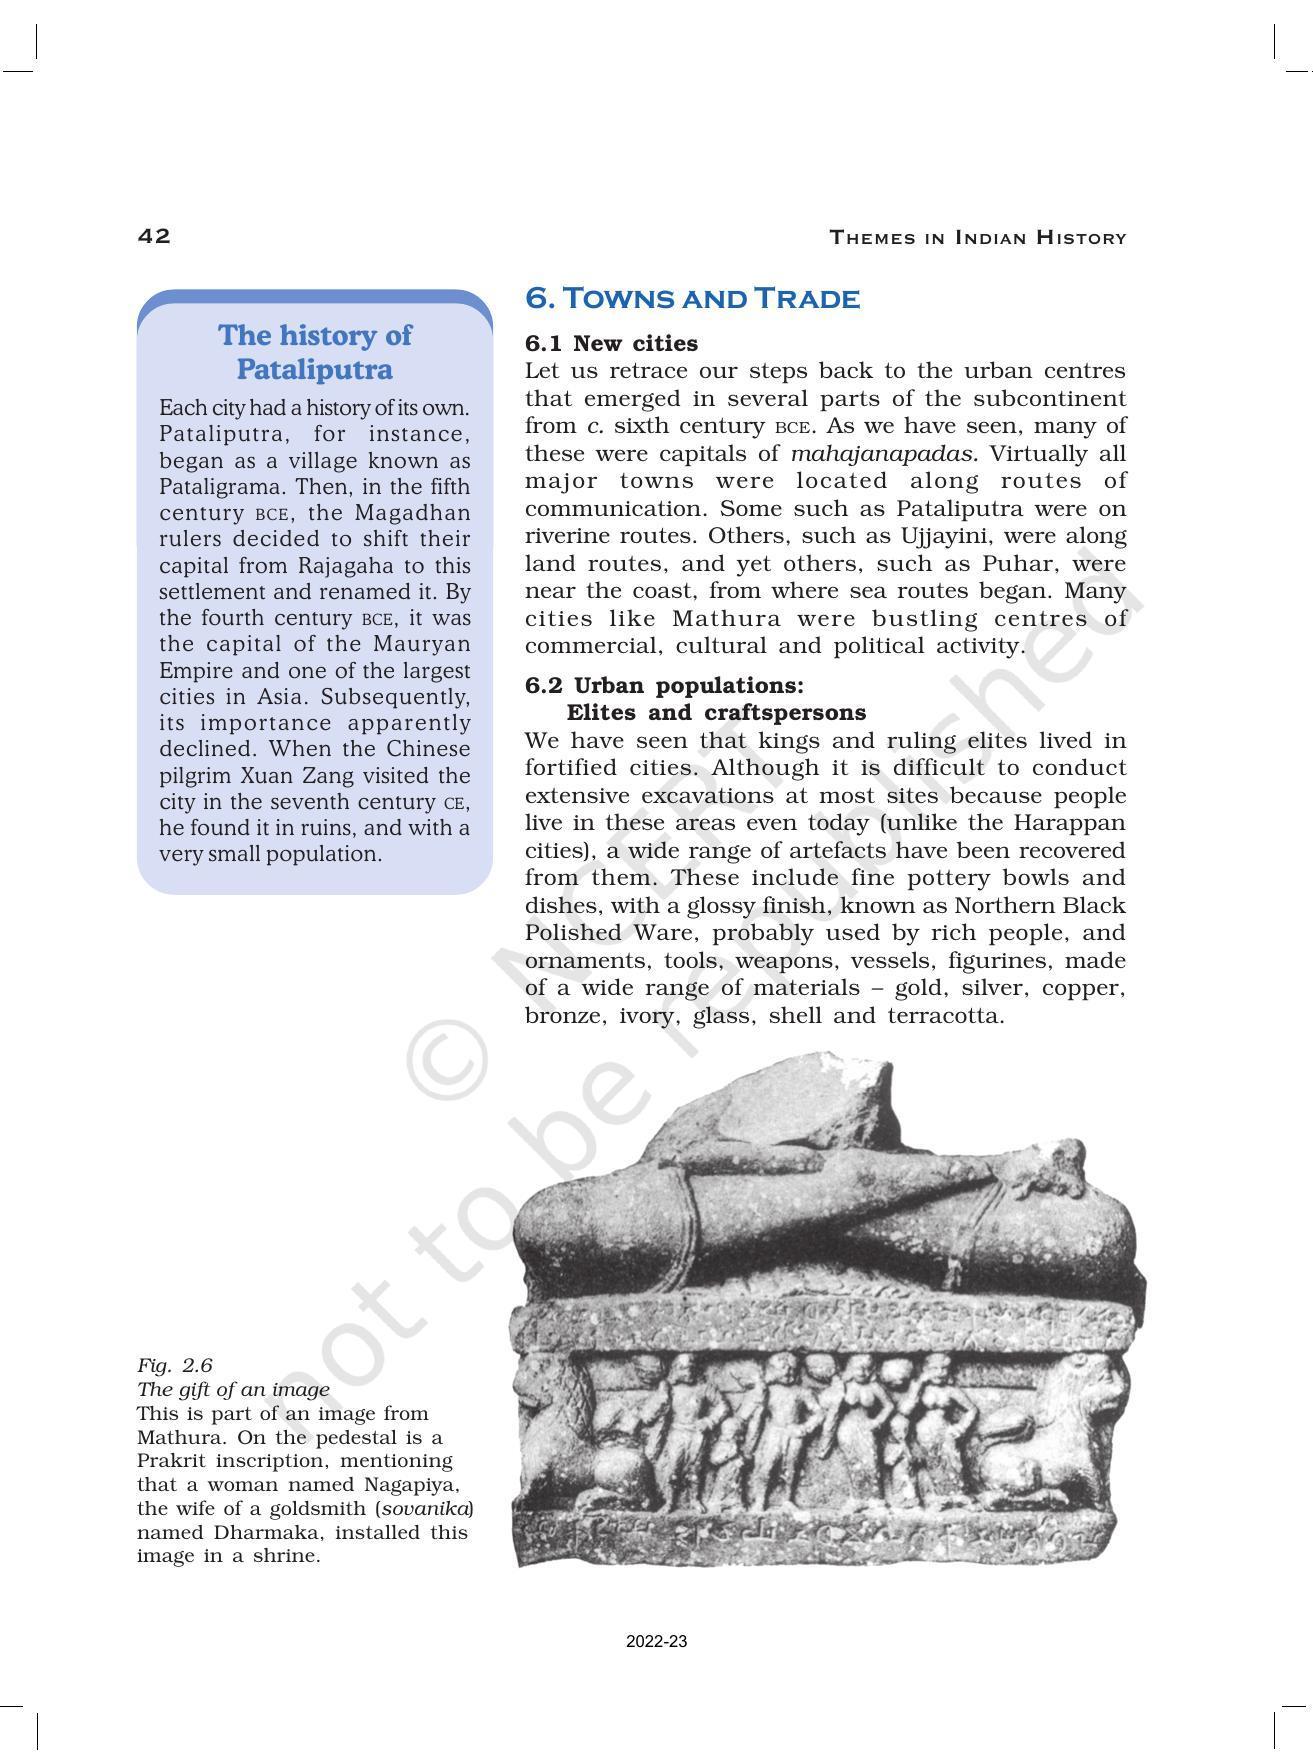 NCERT Book for Class 12 History (Part-1) Chapter 2 Kings, Farmers, and Towns - Page 15